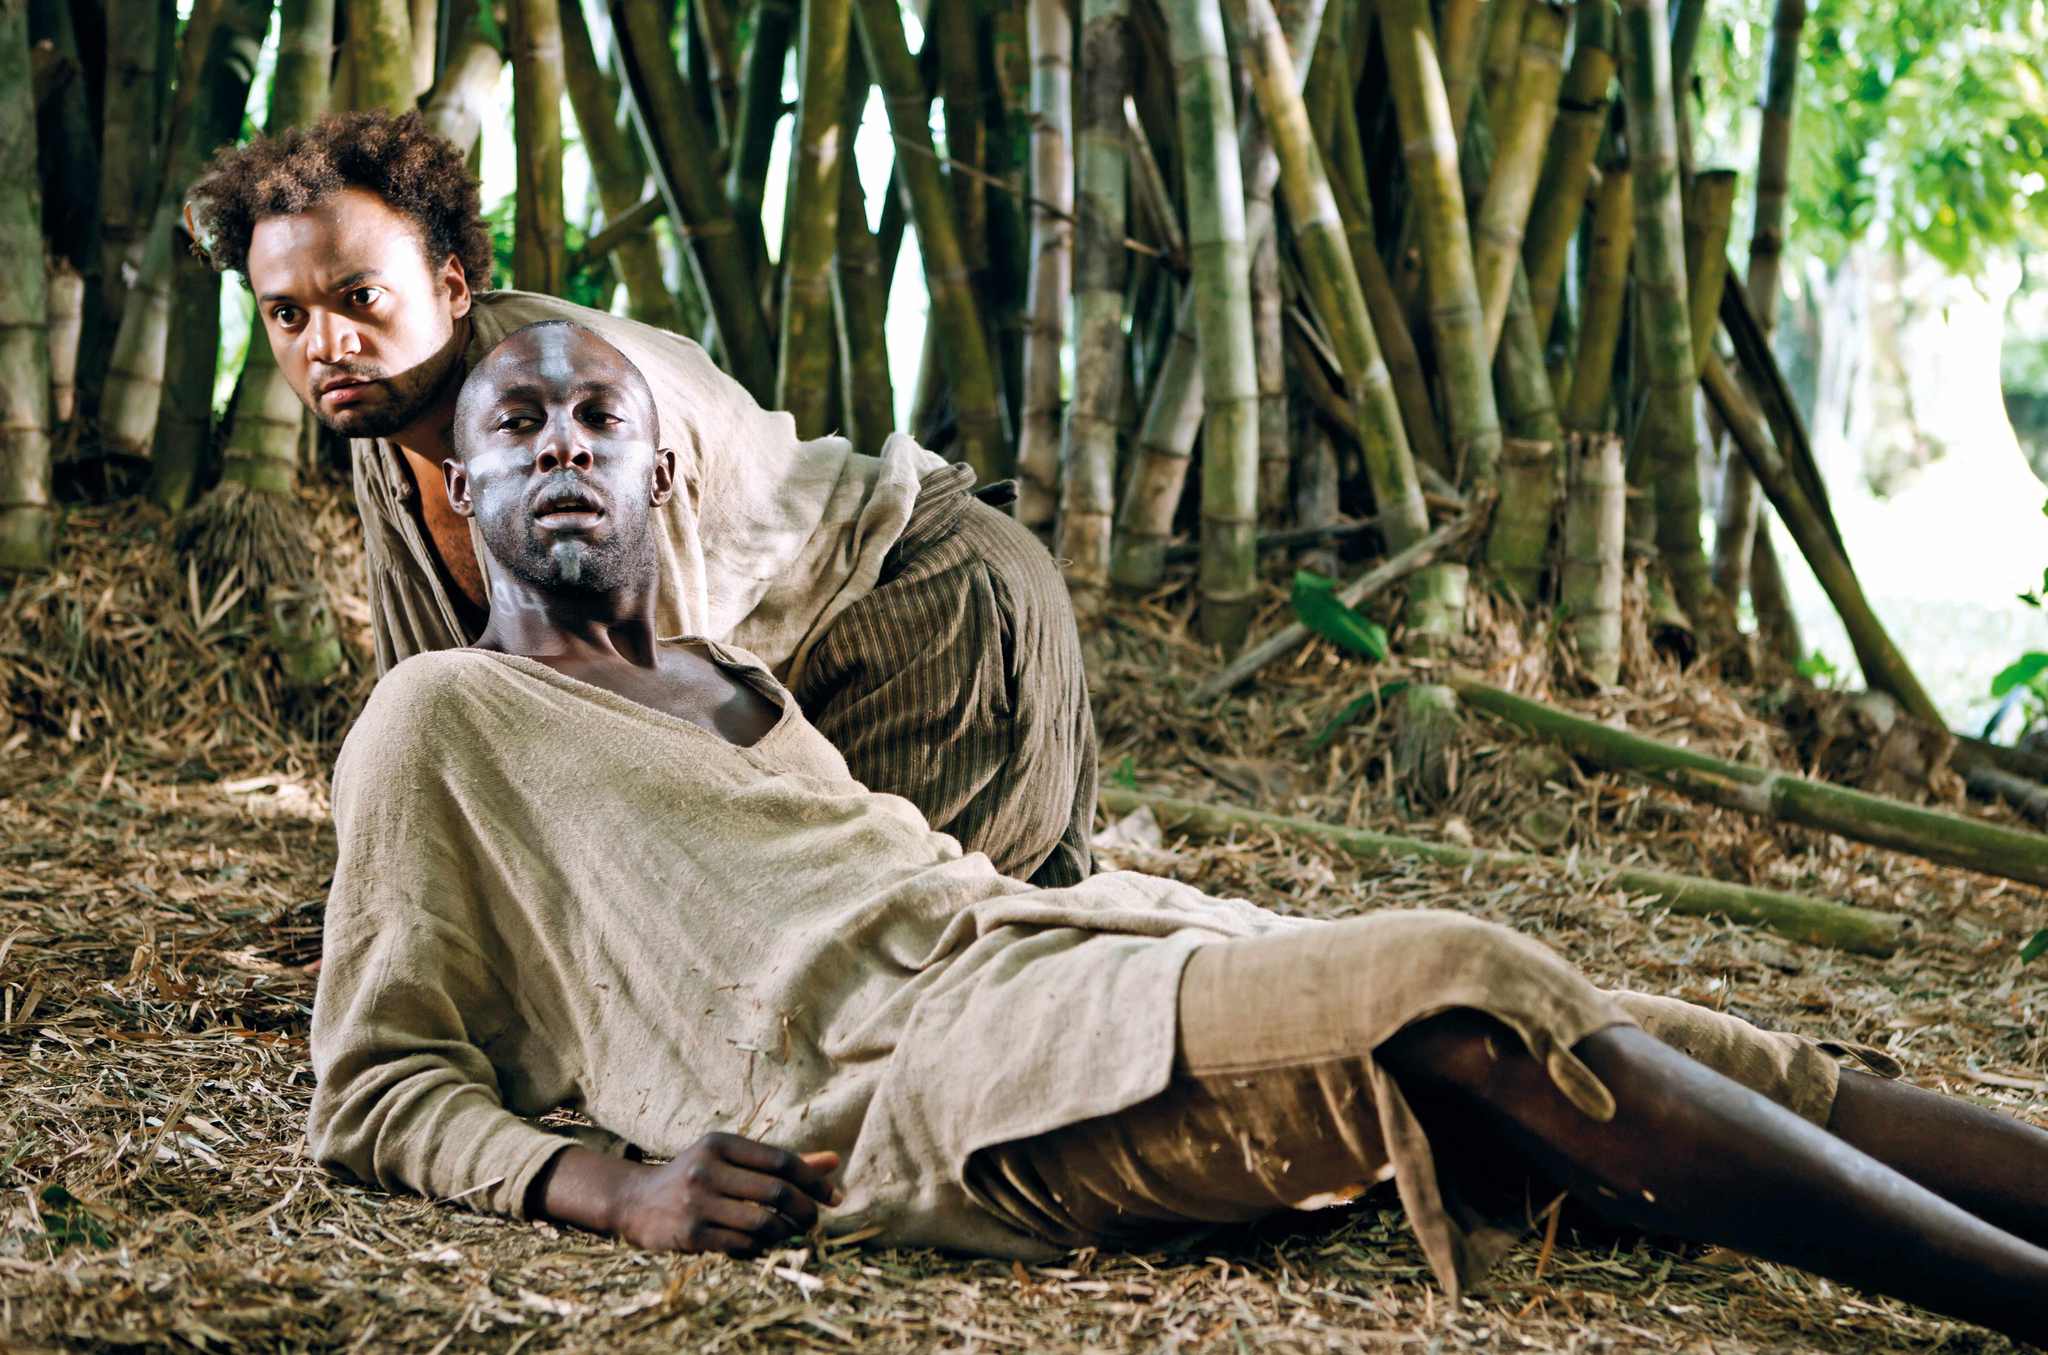 Still of Fabrice Eboué and Thomas N'Gijol in Case départ (2011)